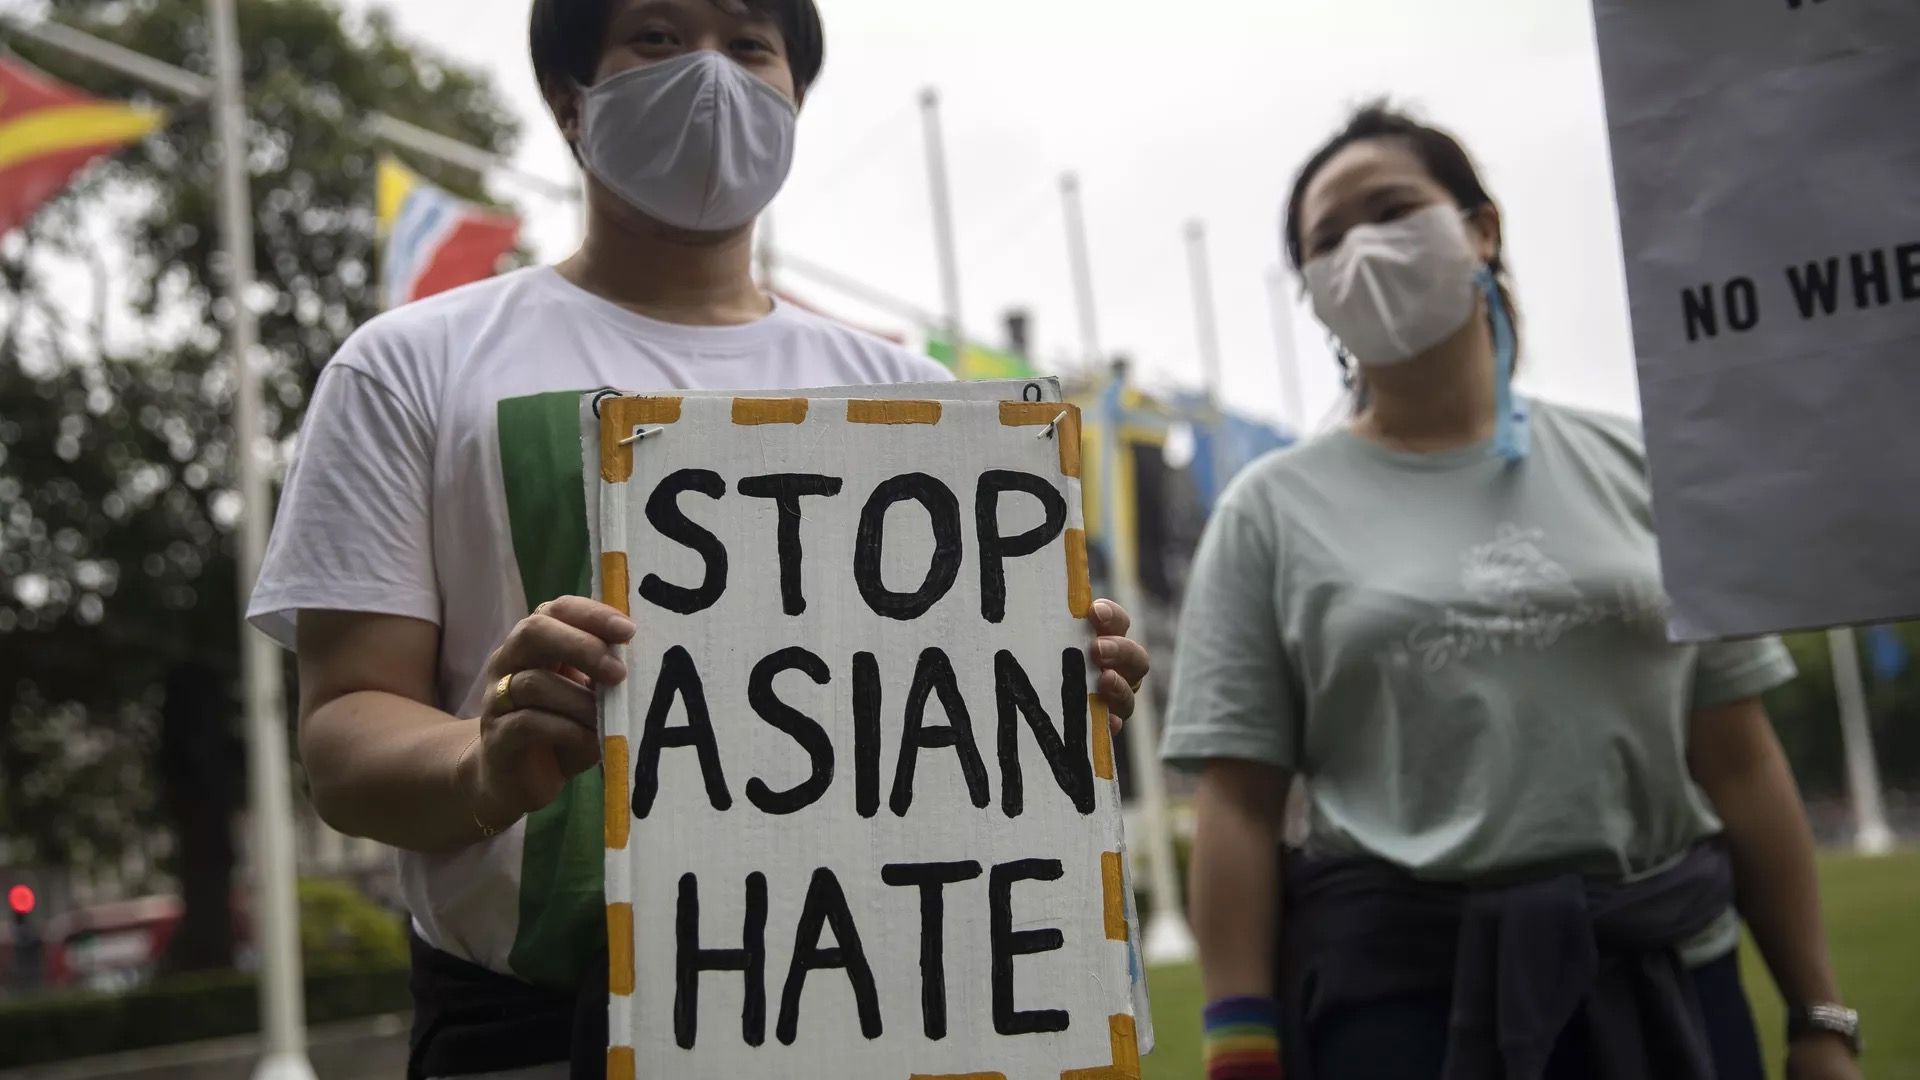 A person at an anti-Asian hate rally is seen.